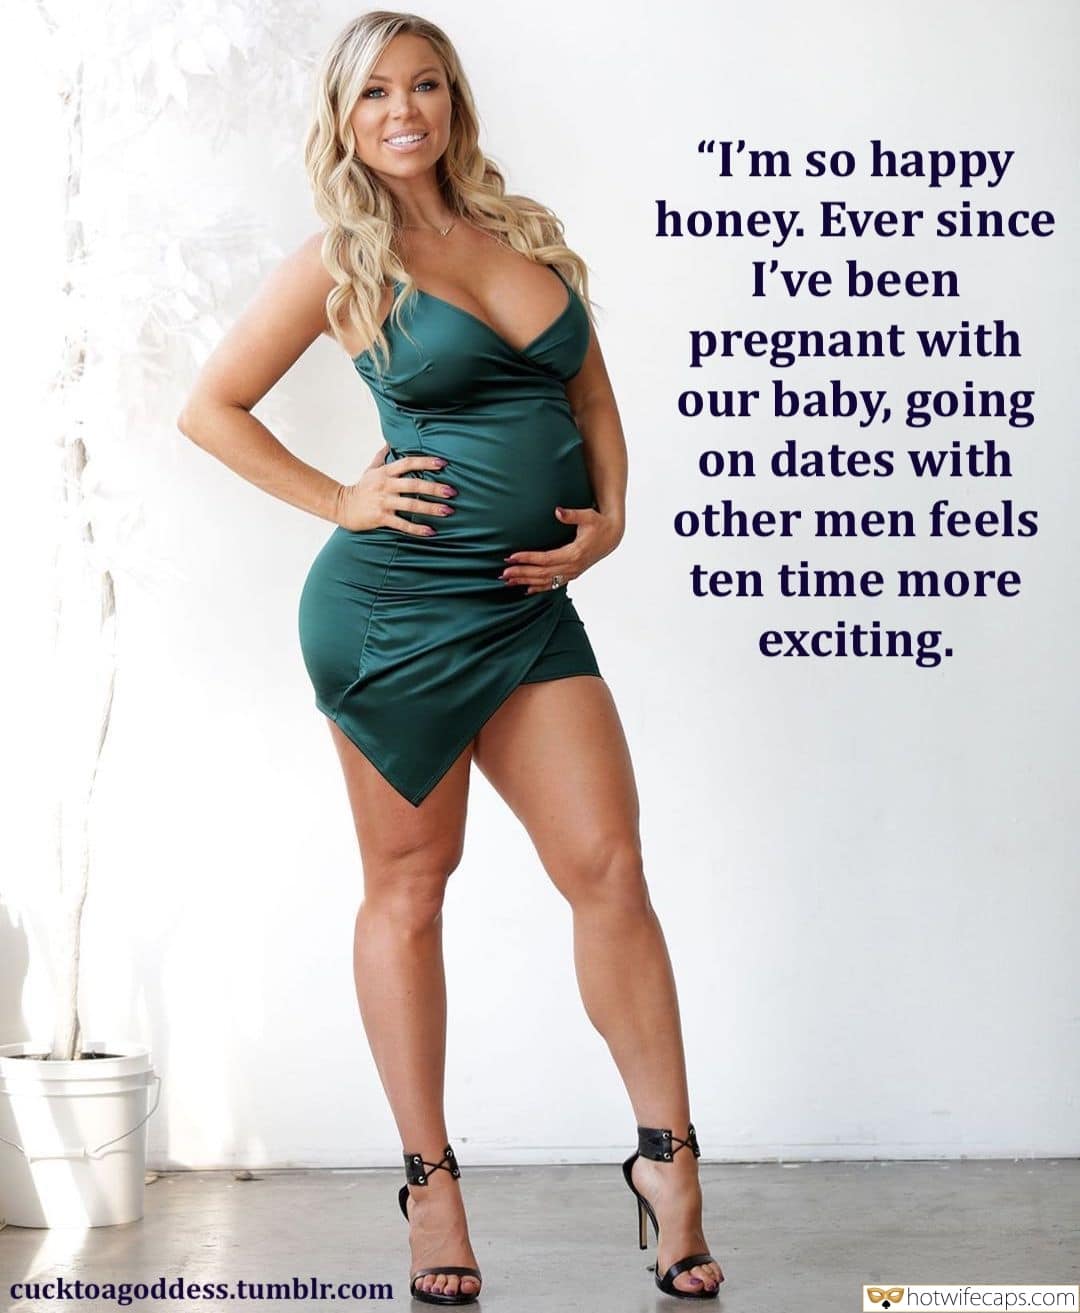 Sexy Memes Humiliation hotwife caption: “I’m so happy honey. Ever since I’ve been pregnant with our baby, going on dates with other men feels ten time more exciting. cucktoagoddess.tumblr.com Voluptuous Pregnant Blonde in Green Dress